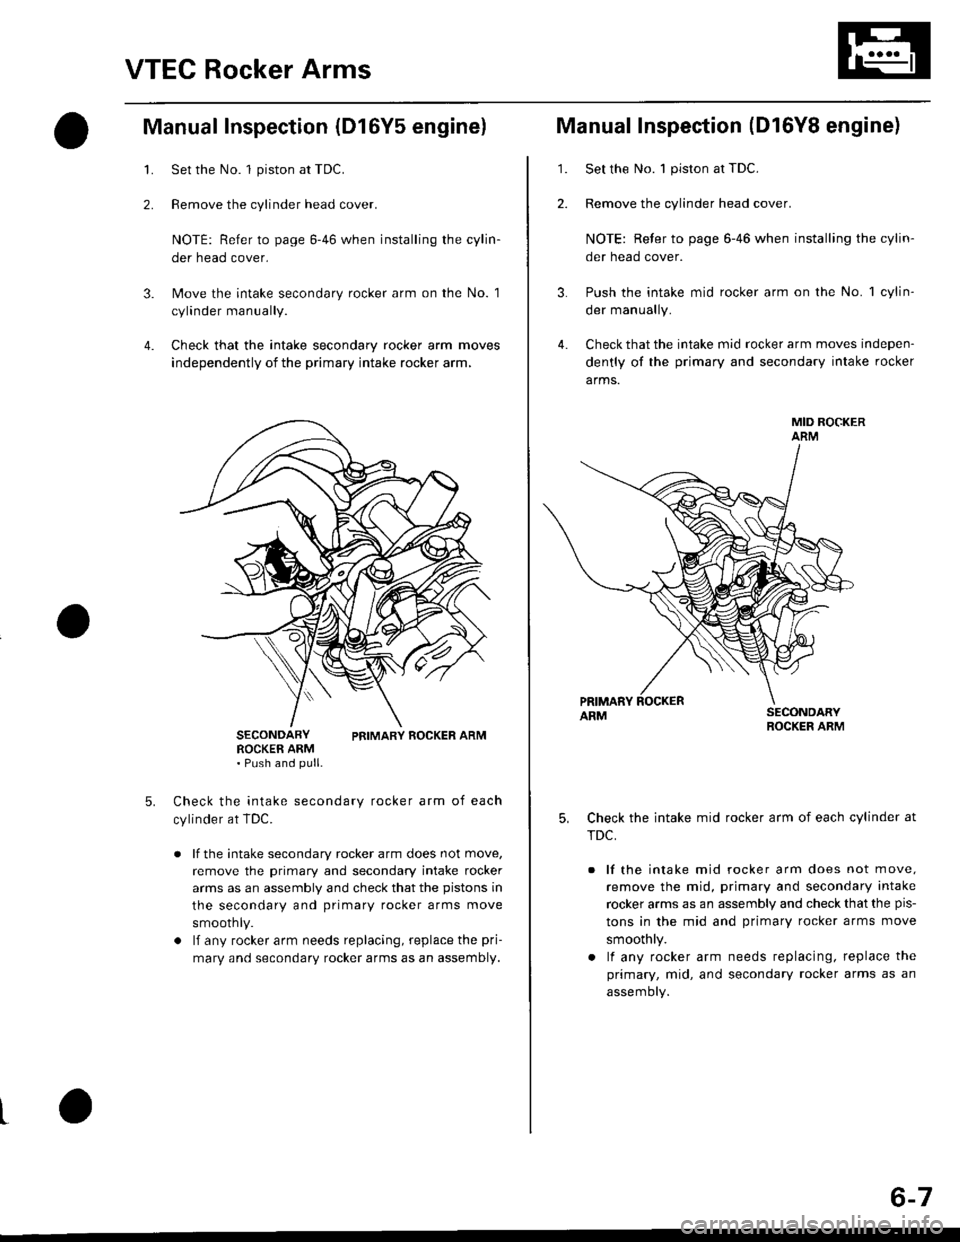 HONDA CIVIC 1997 6.G Repair Manual VTEC Rocker Arms
2.
Manual Inspection (D16Y5 engine)
3.
1.
4.
Set the No. 1 piston at TDC.
Remove the cylinder head cover.
NOTE: Refer to page 6-46 when installing the cylin-
der head cover.
Move the 